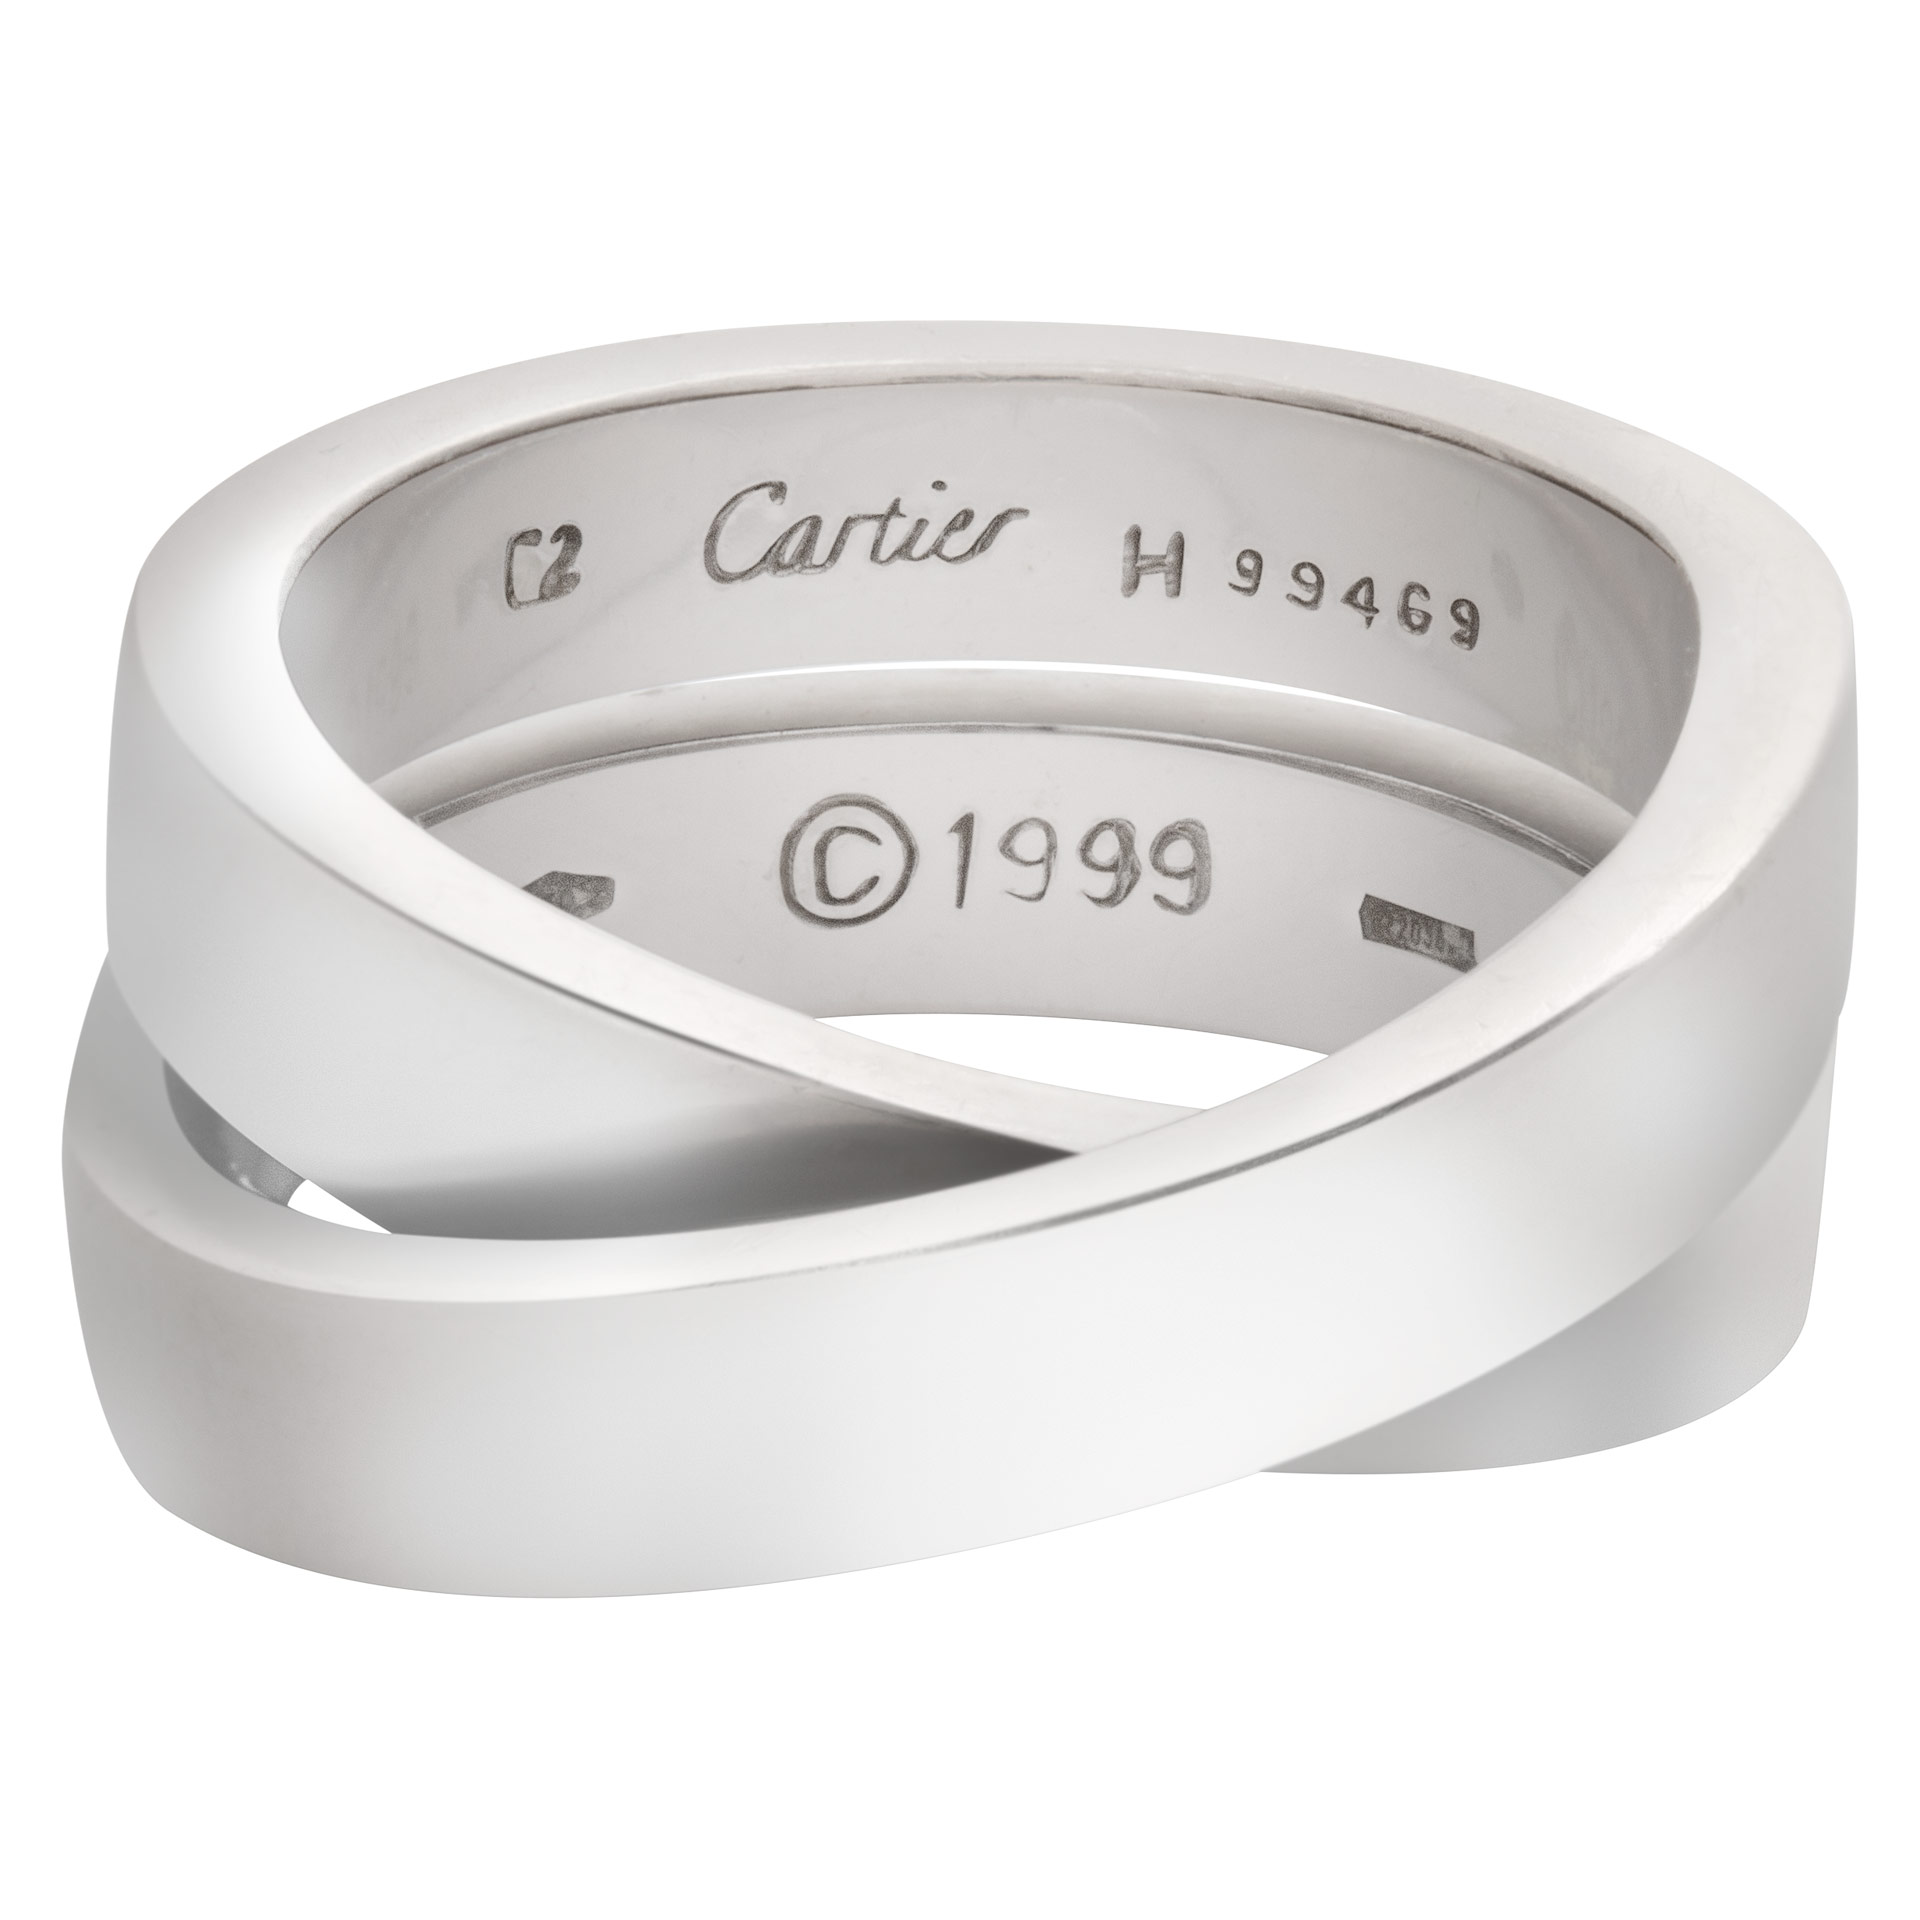 Cartier Crossover ring in 18k white gold